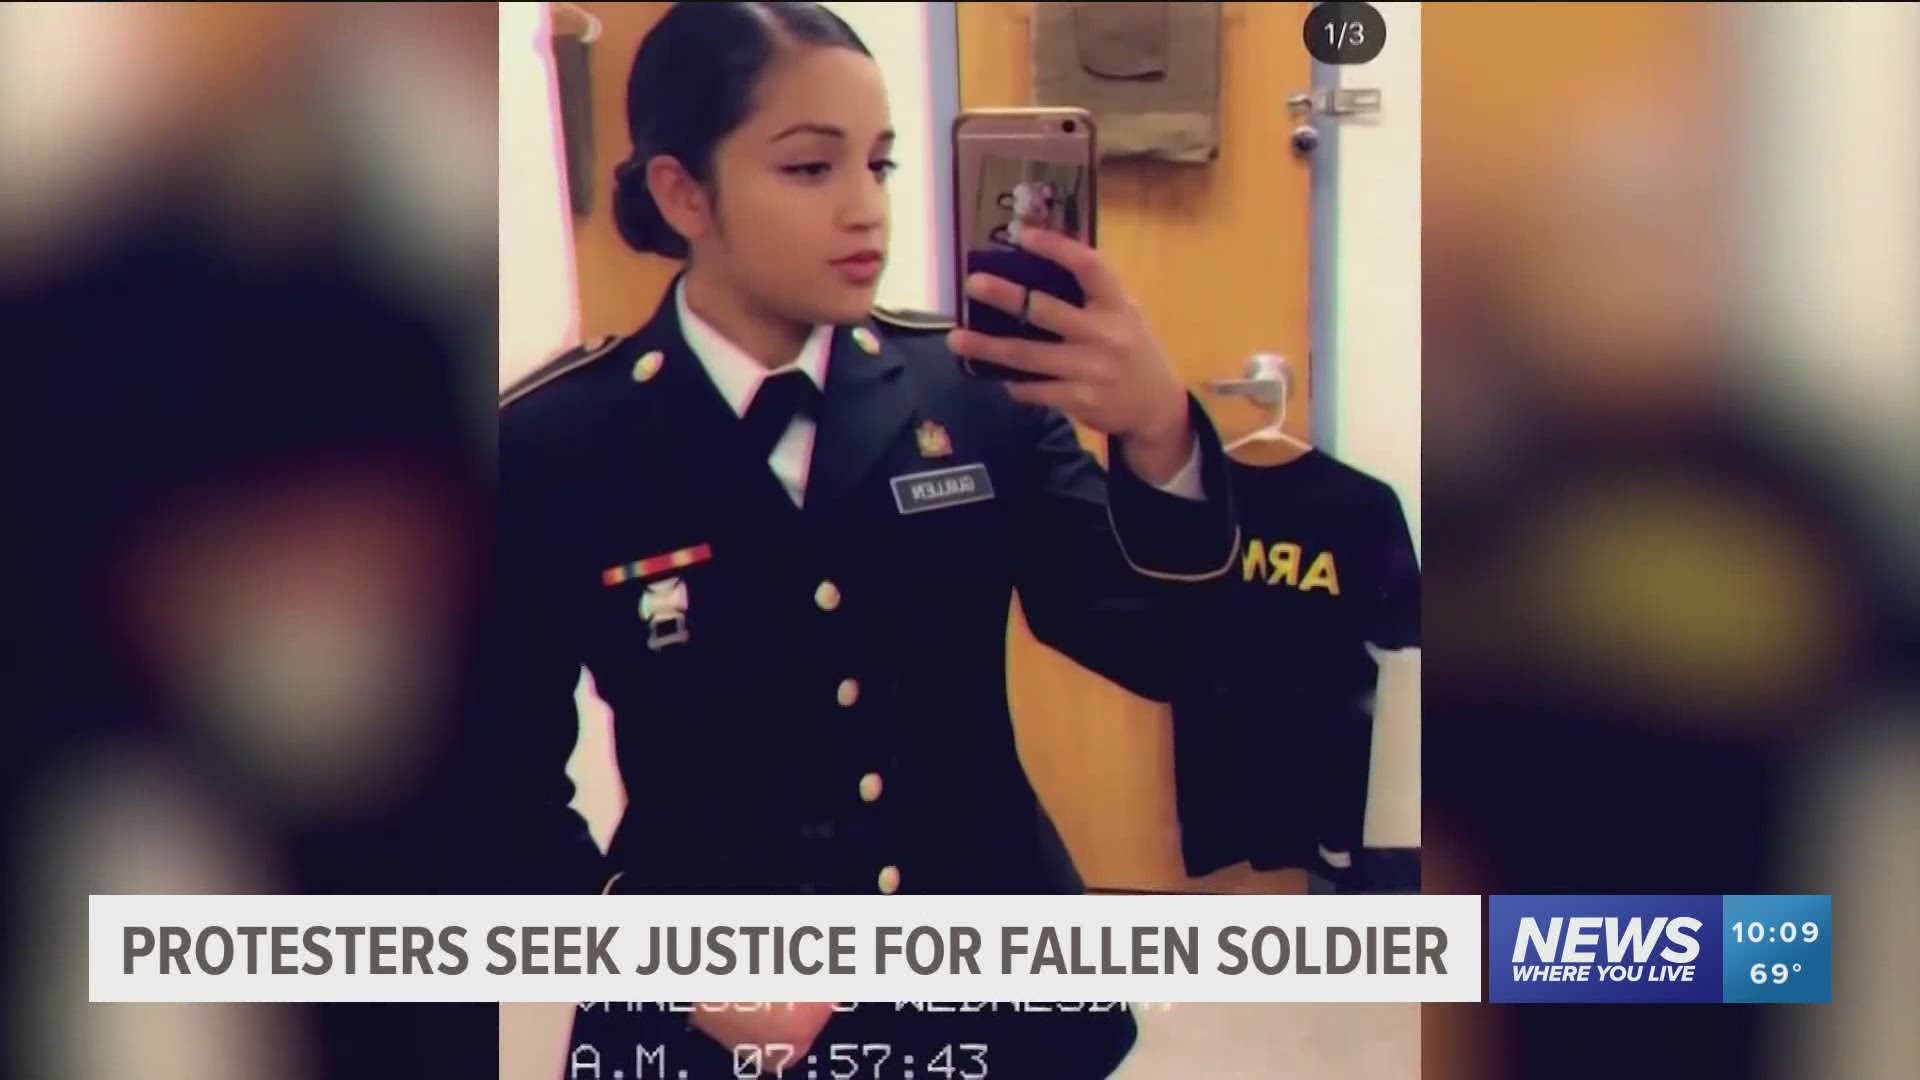 Protesters seek justice for fallen soldier.